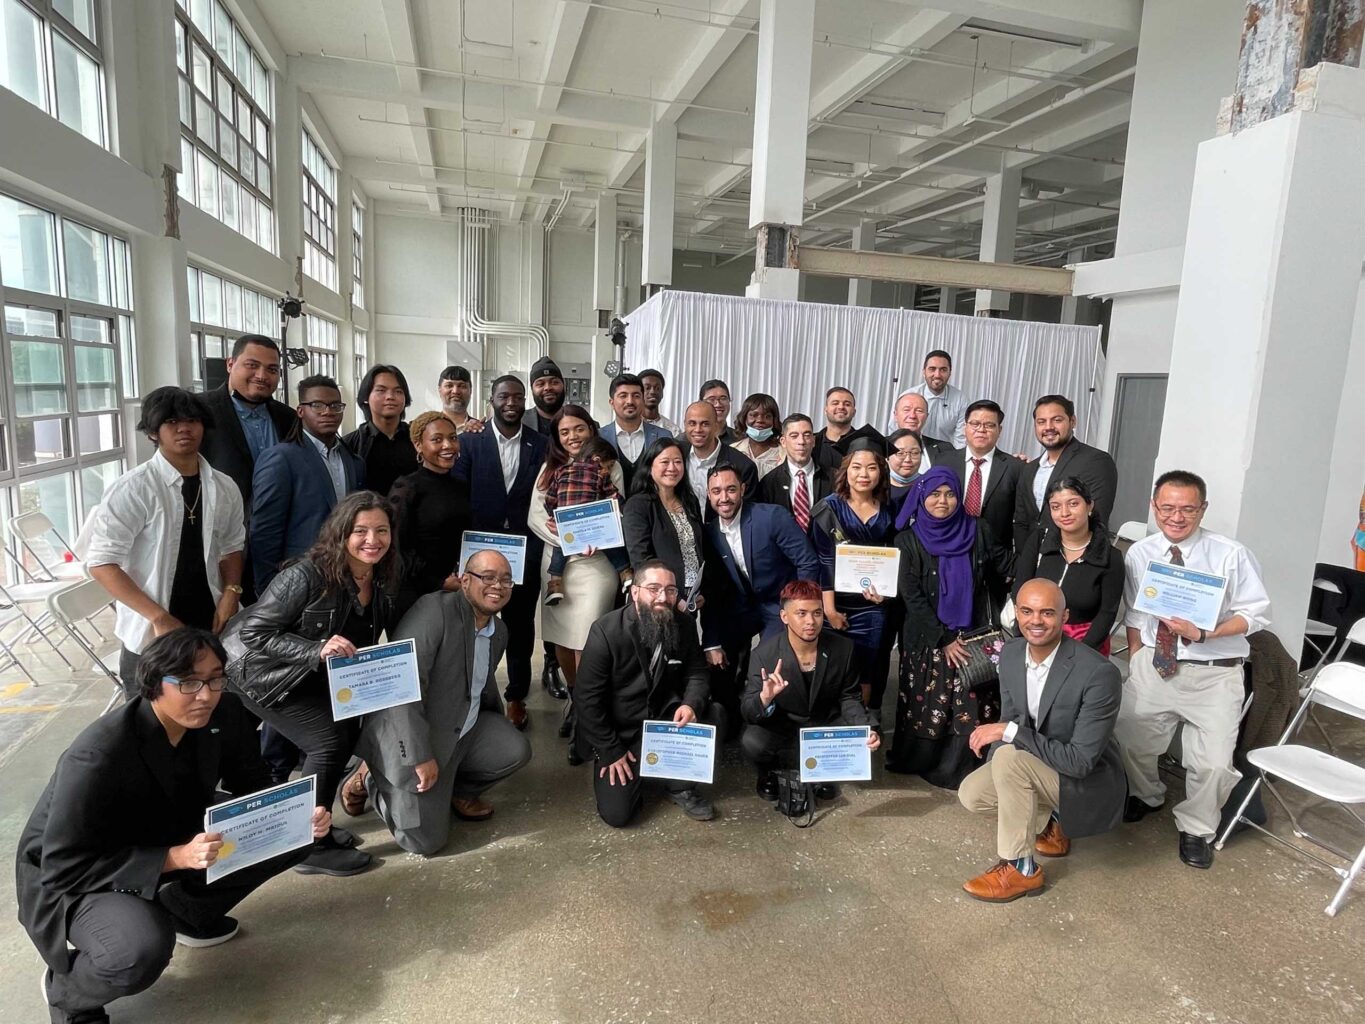 A group of people posing for a photo with their certificates.